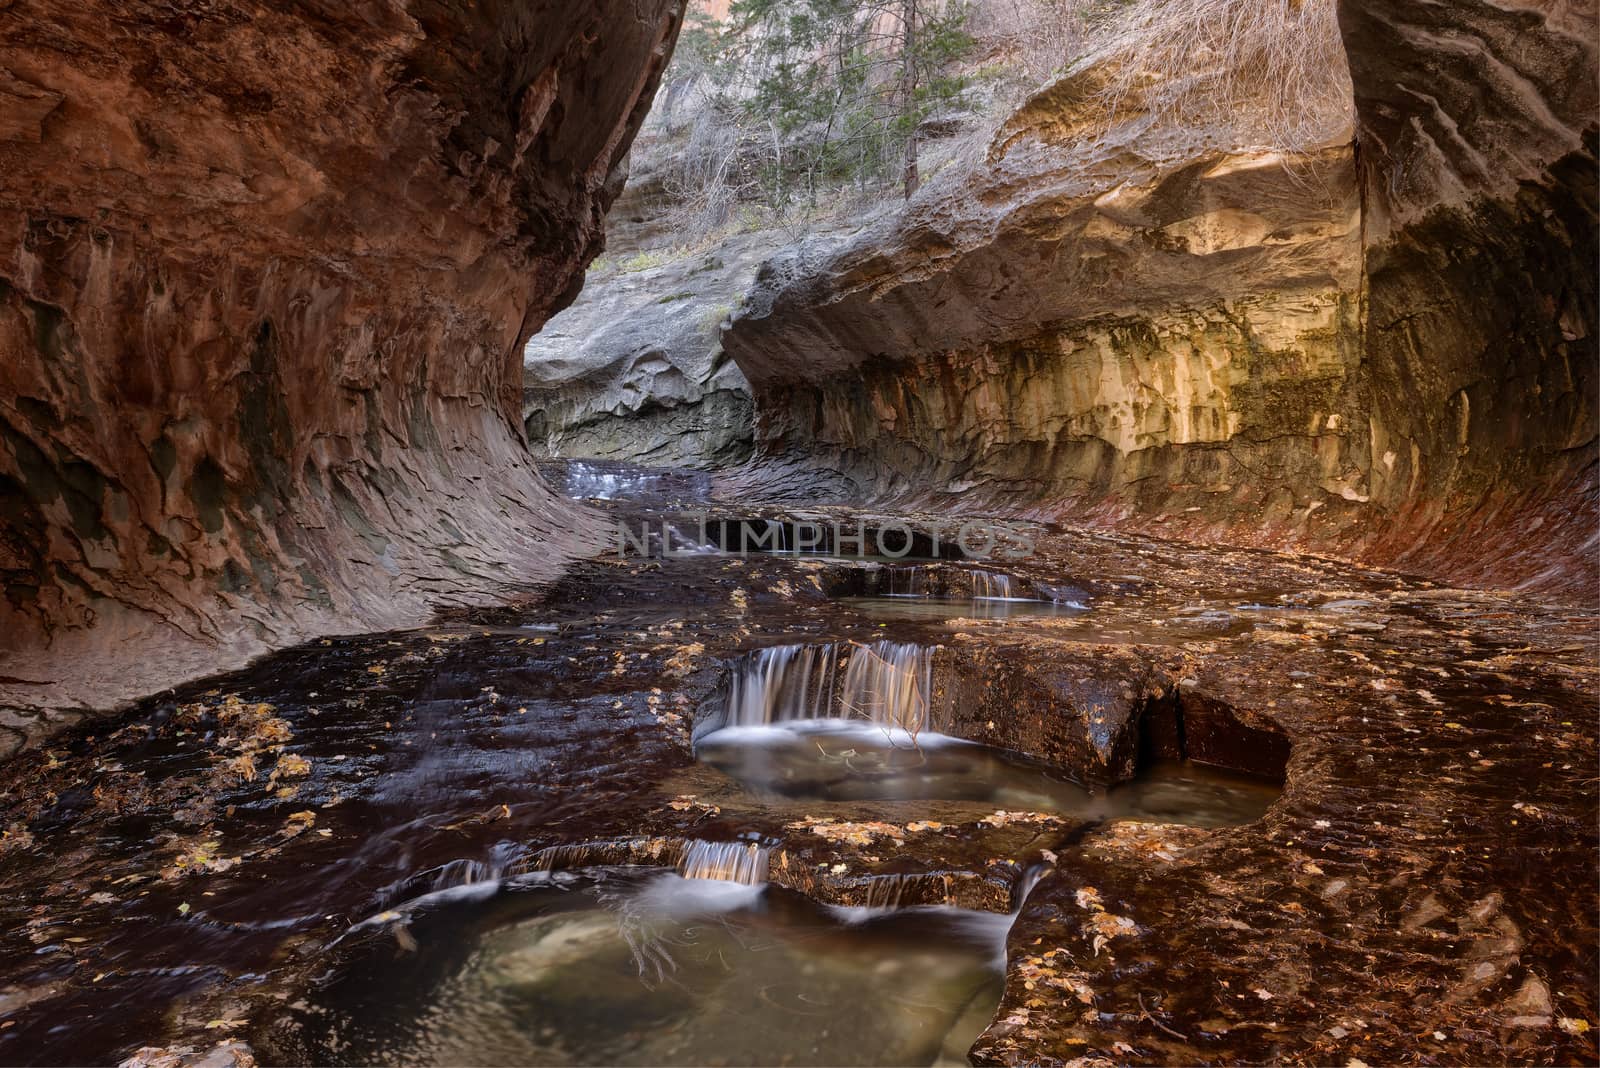 Entrance to The Subway, Zion National Park by emiddelkoop